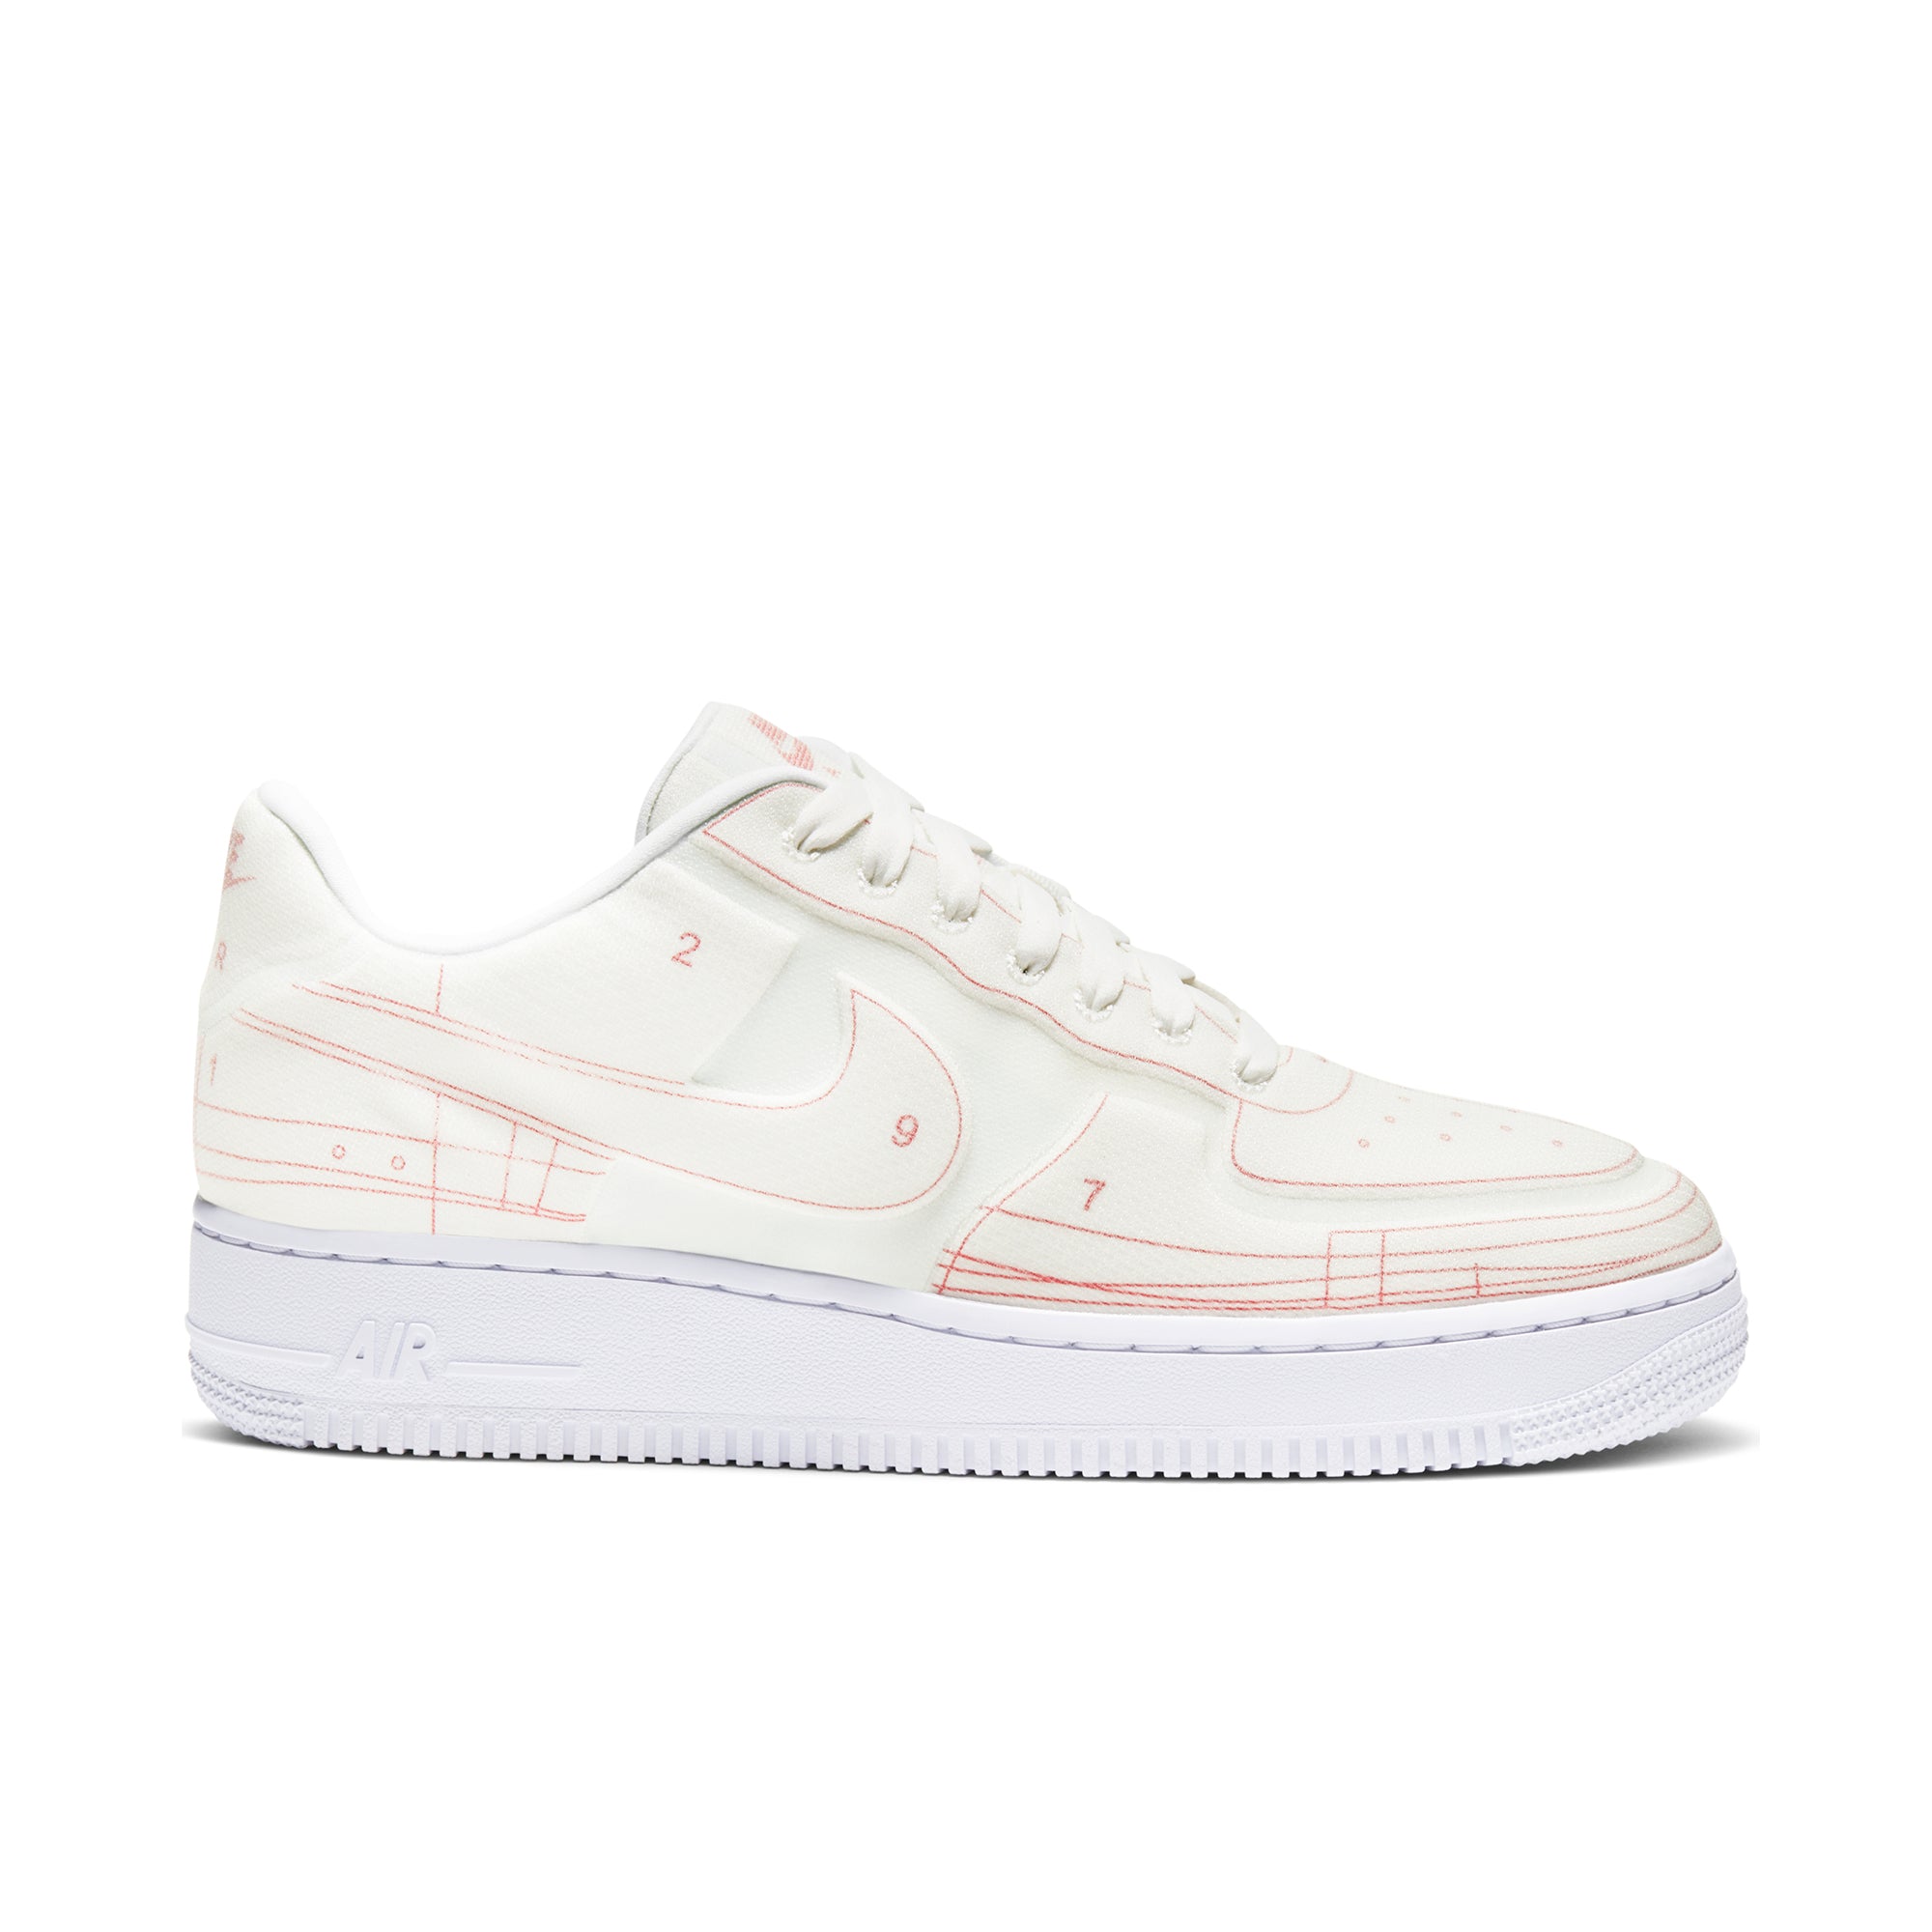 nike air force 1 low black and white Nike Air Force 1 Low '07 LX Blueprint Summit White (W)